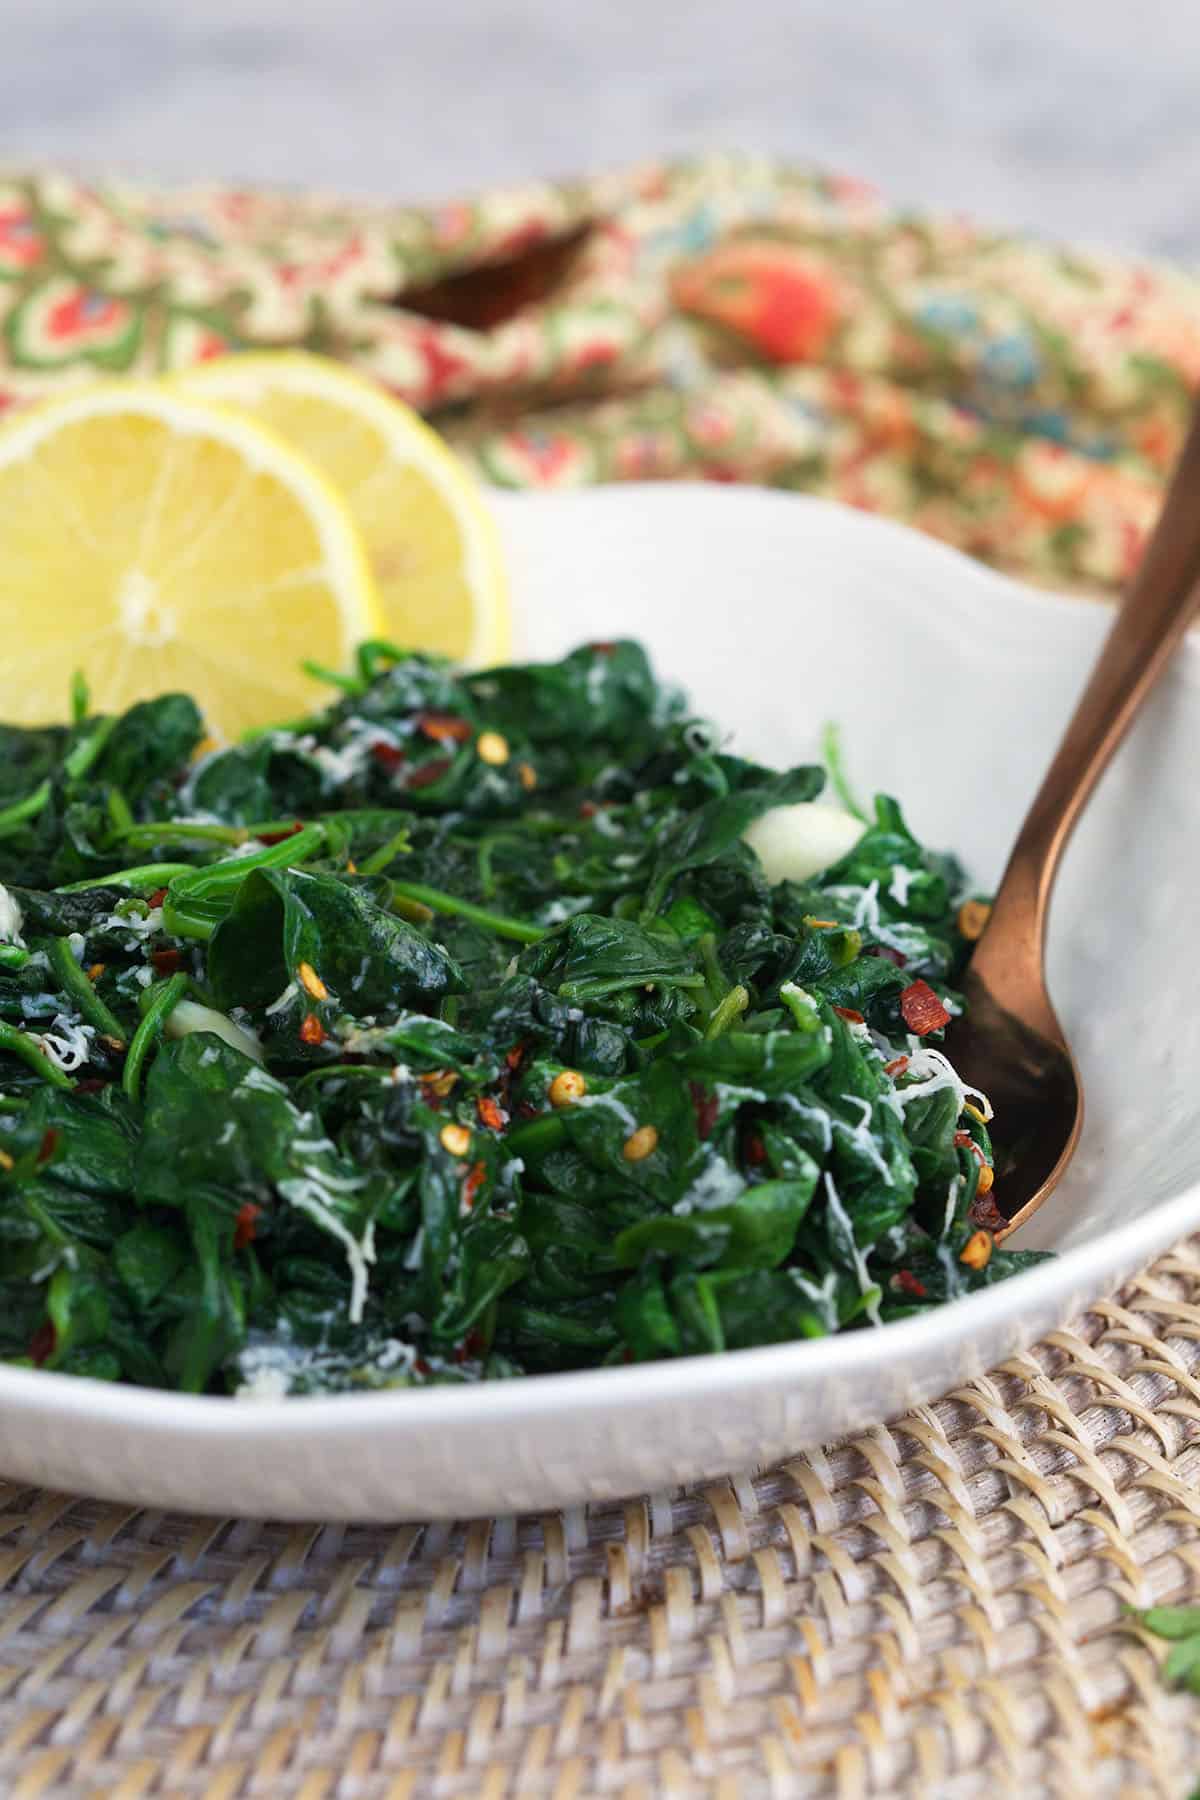 Lemon slices are placed in a white bowl filled with cooked spinach. 